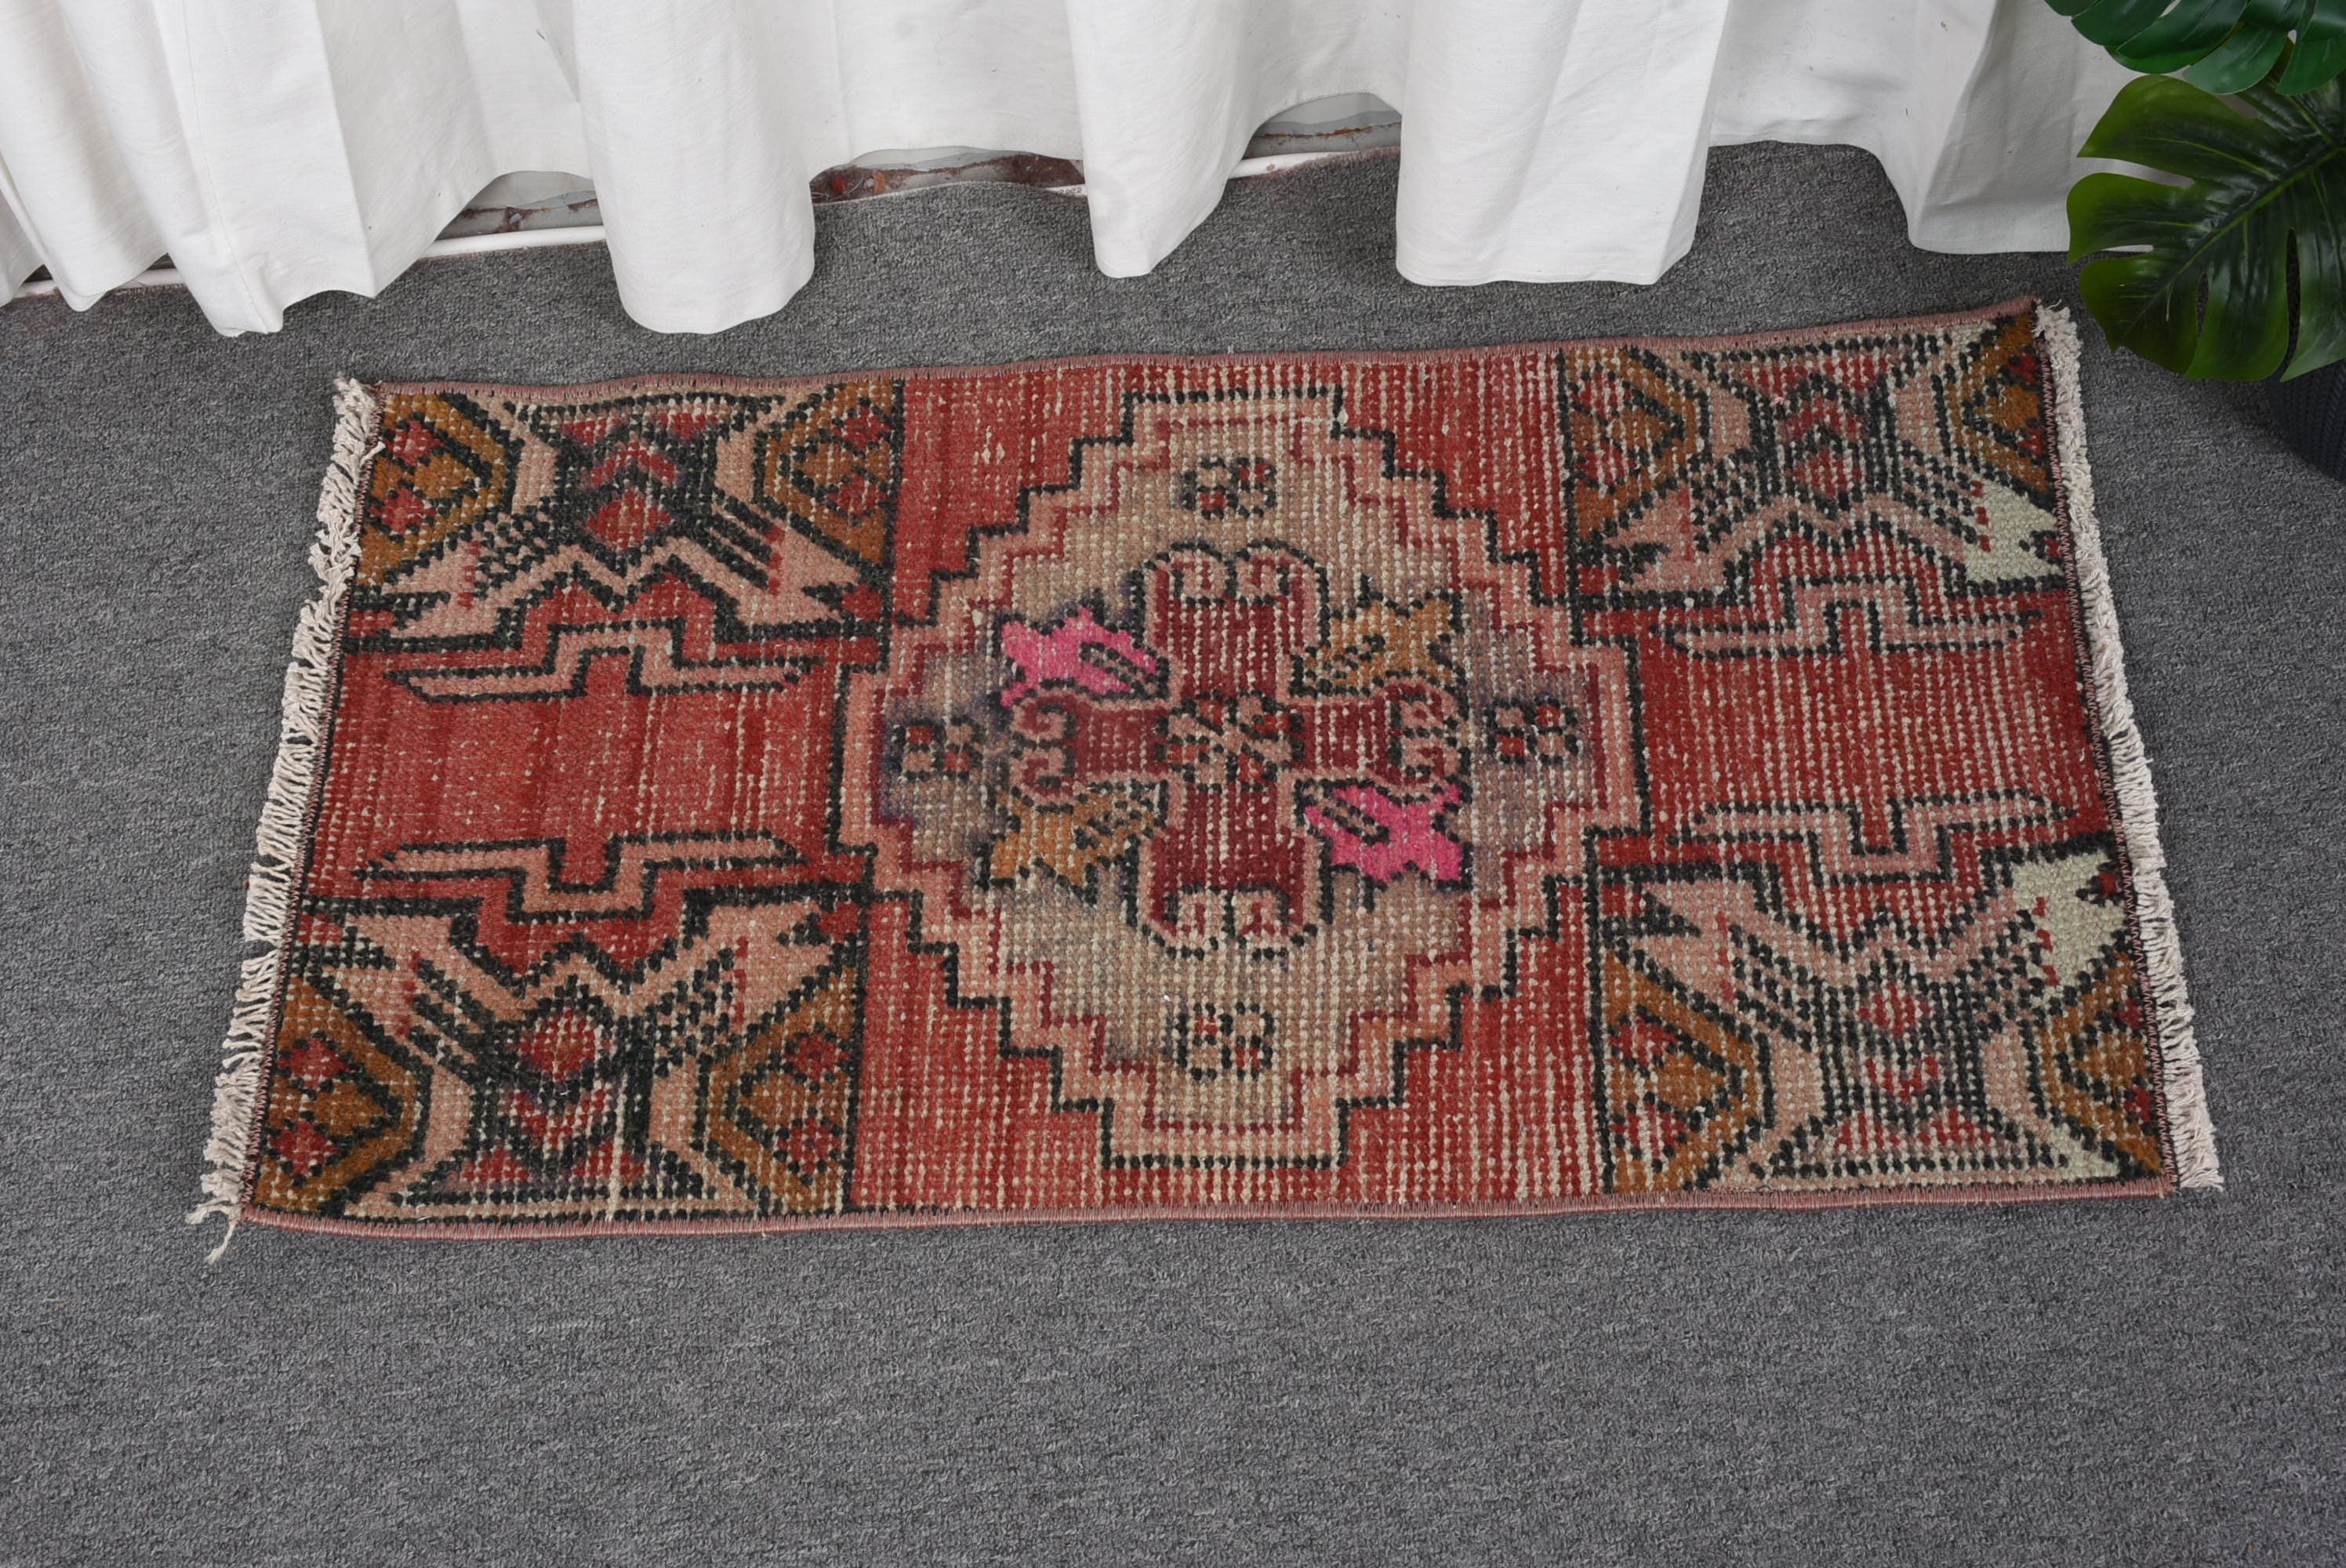 Red Kitchen Rug, Entry Rug, 1.4x2.6 ft Small Rugs, Floor Rug, Wall Hanging Rugs, Moroccan Rug, Rugs for Entry, Turkish Rugs, Vintage Rugs